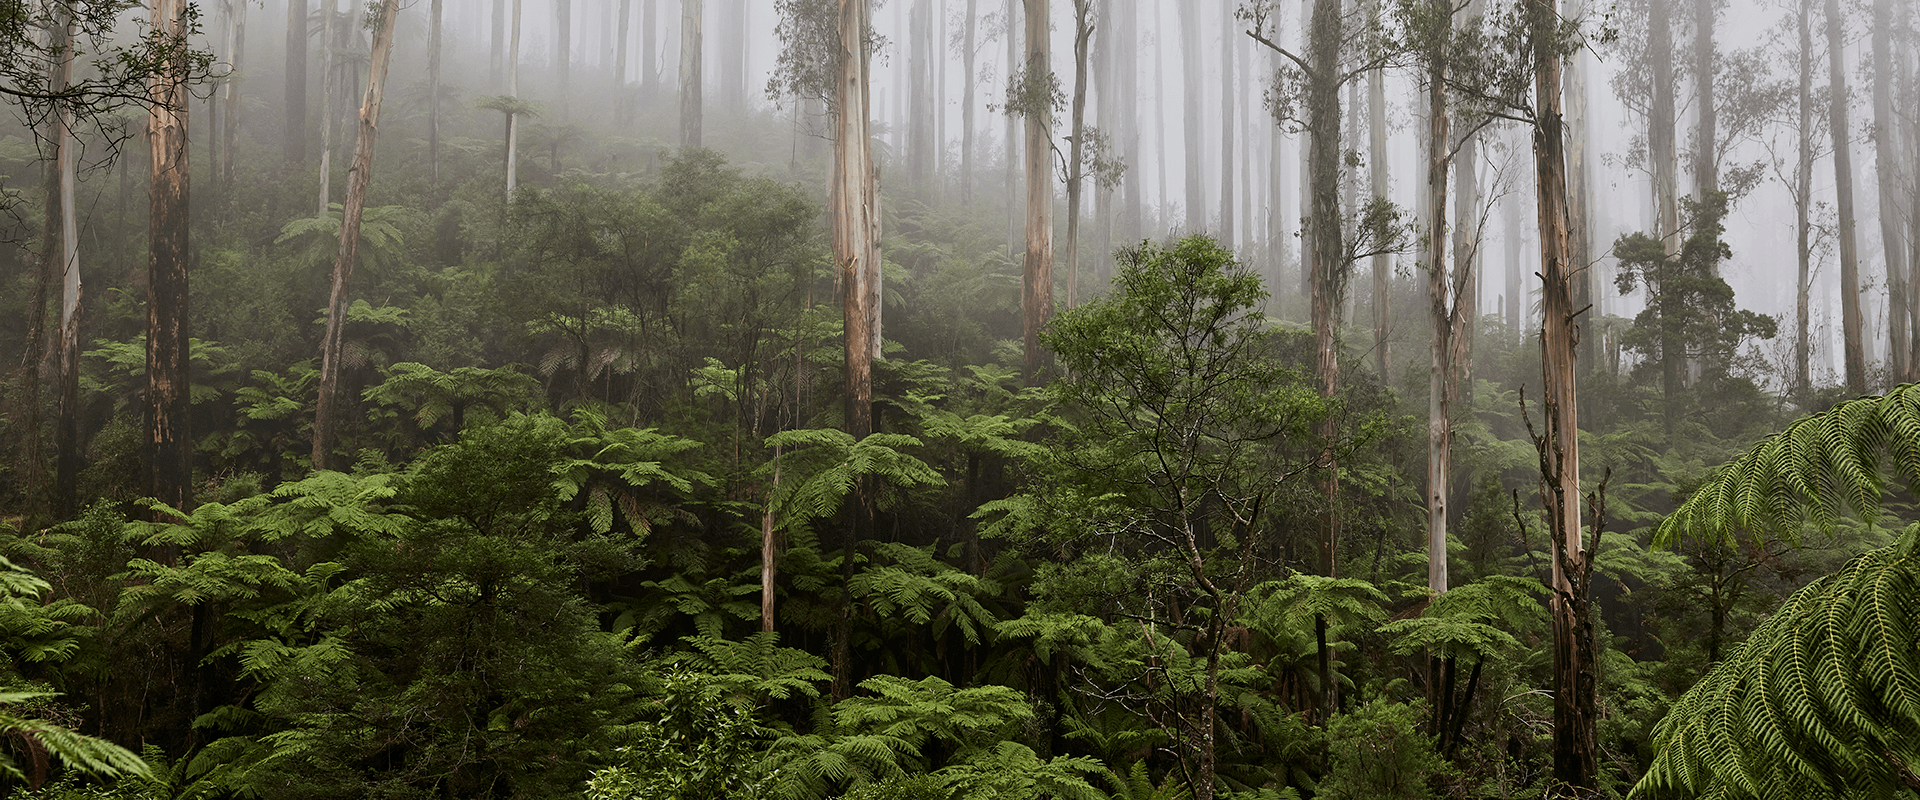 A sloping hill covered in old tree ferns and towering Mountain Ash